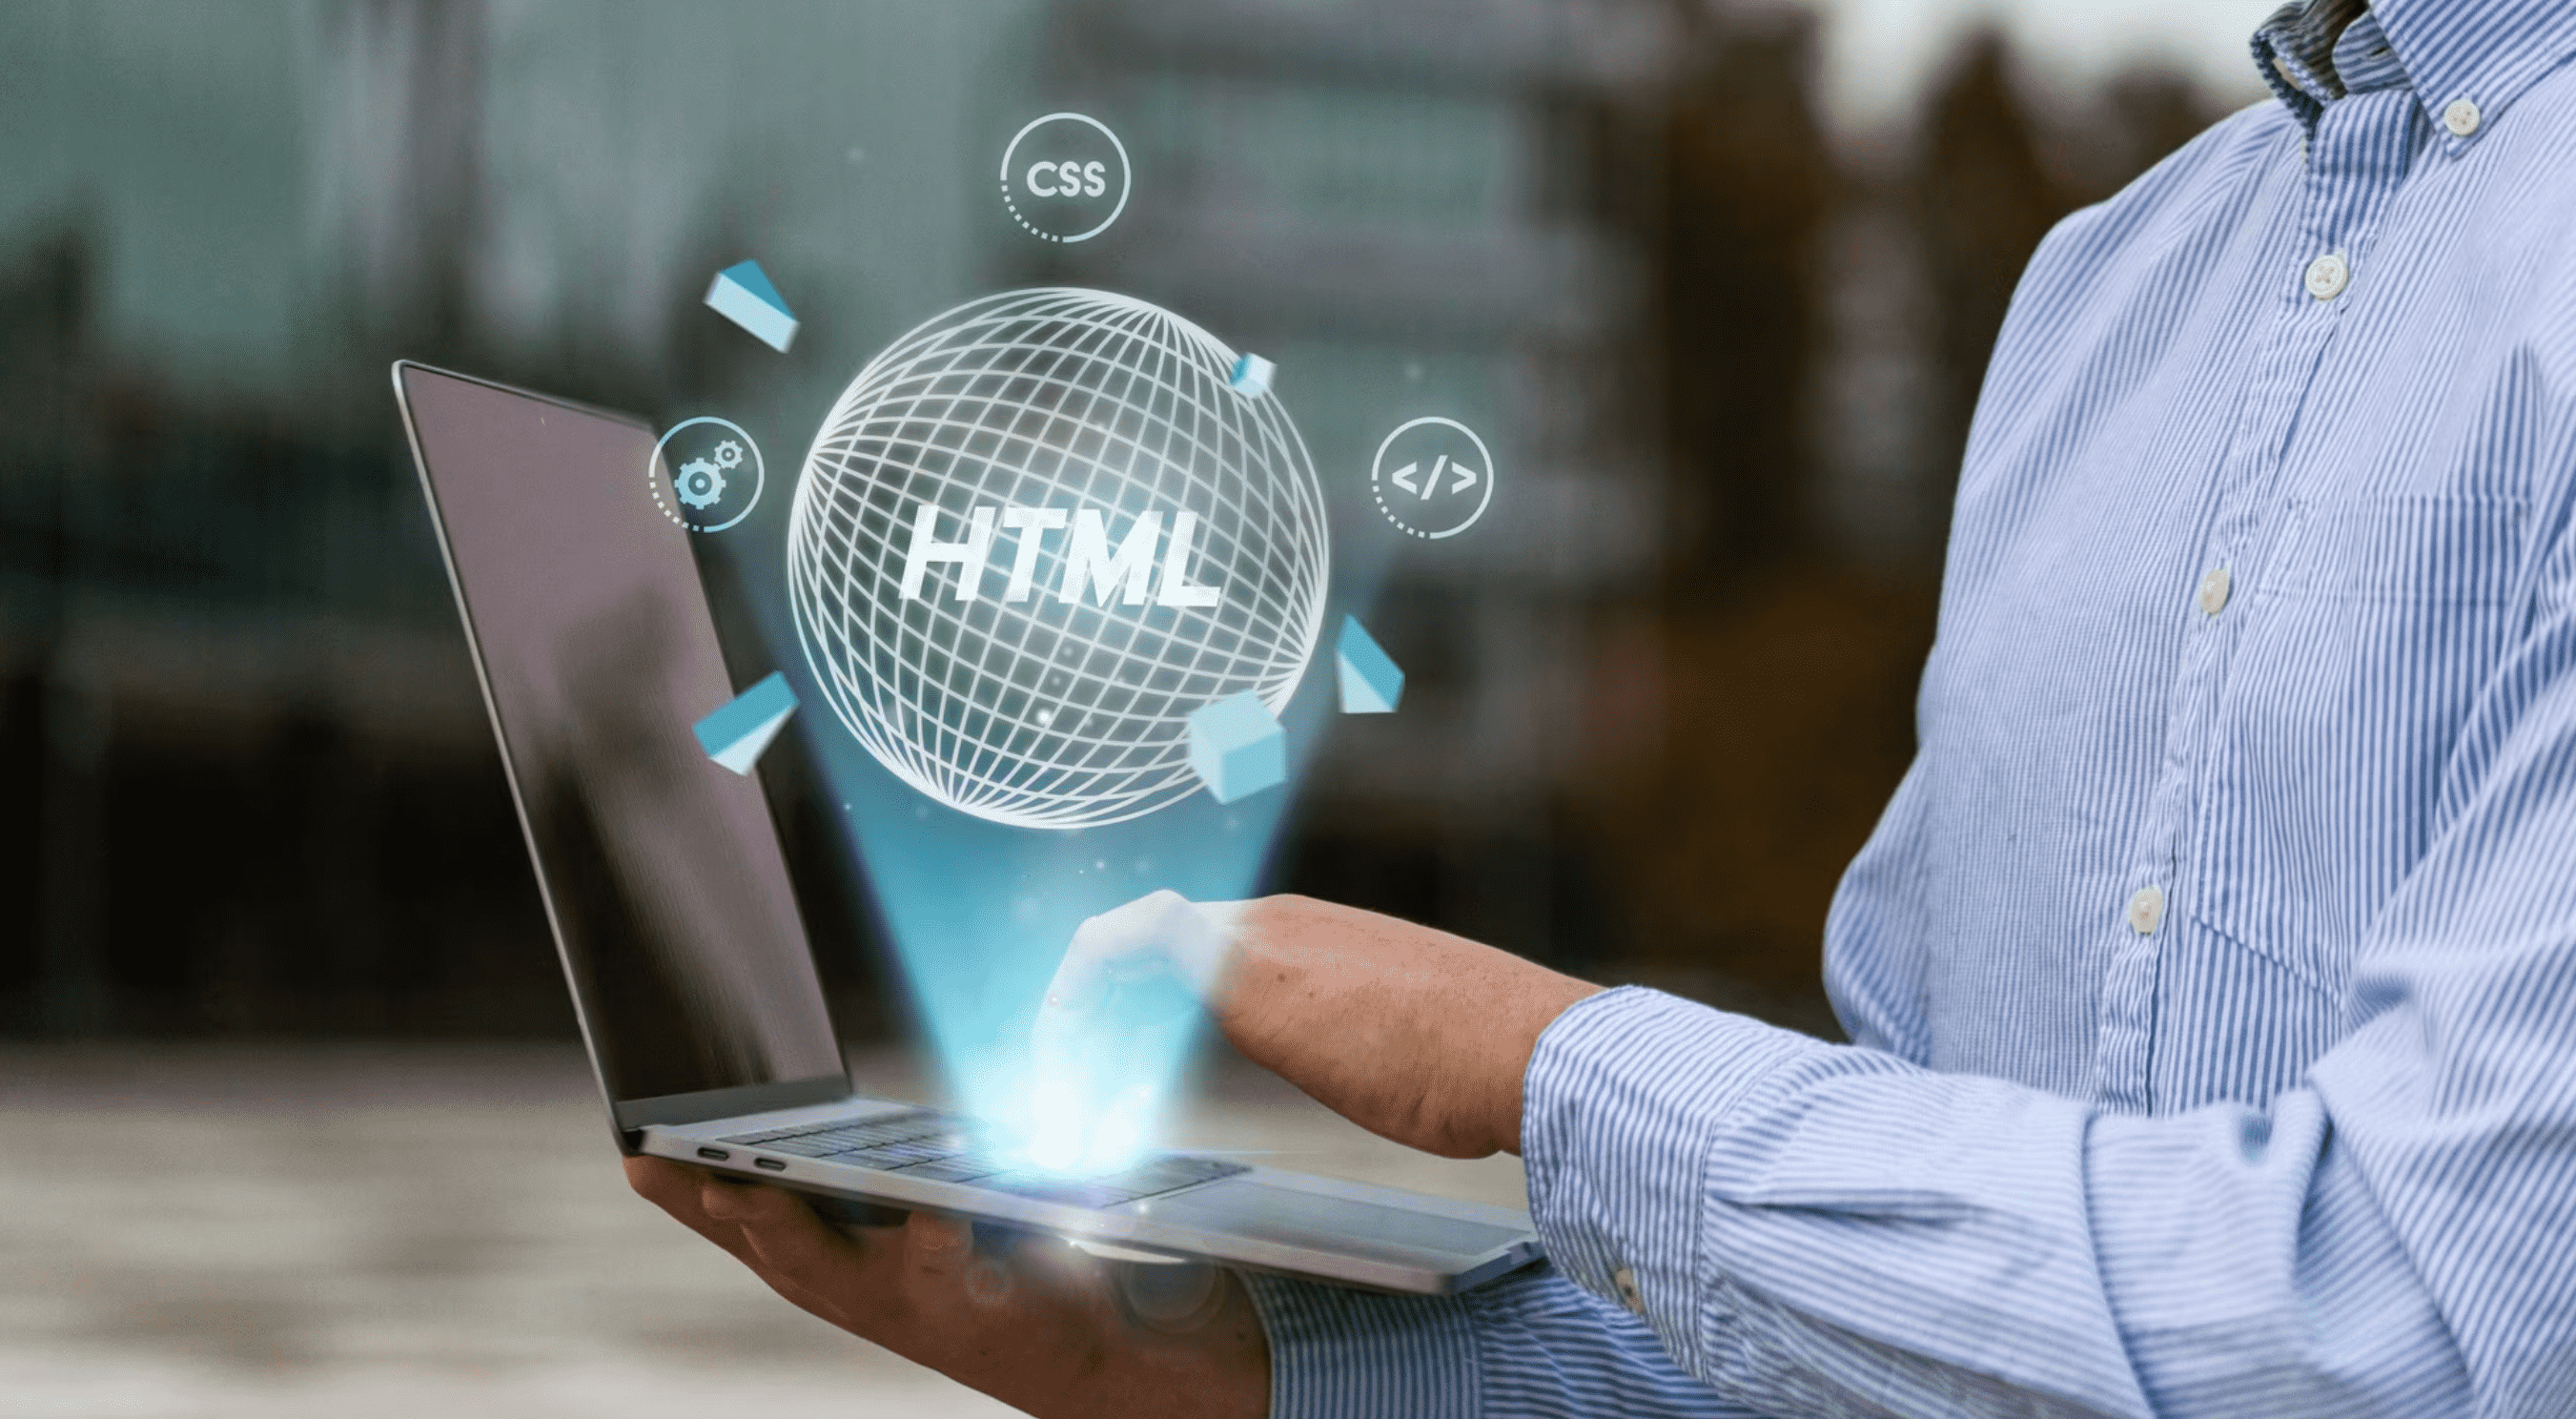 Remove HTML extension for clean URLs using htaccess